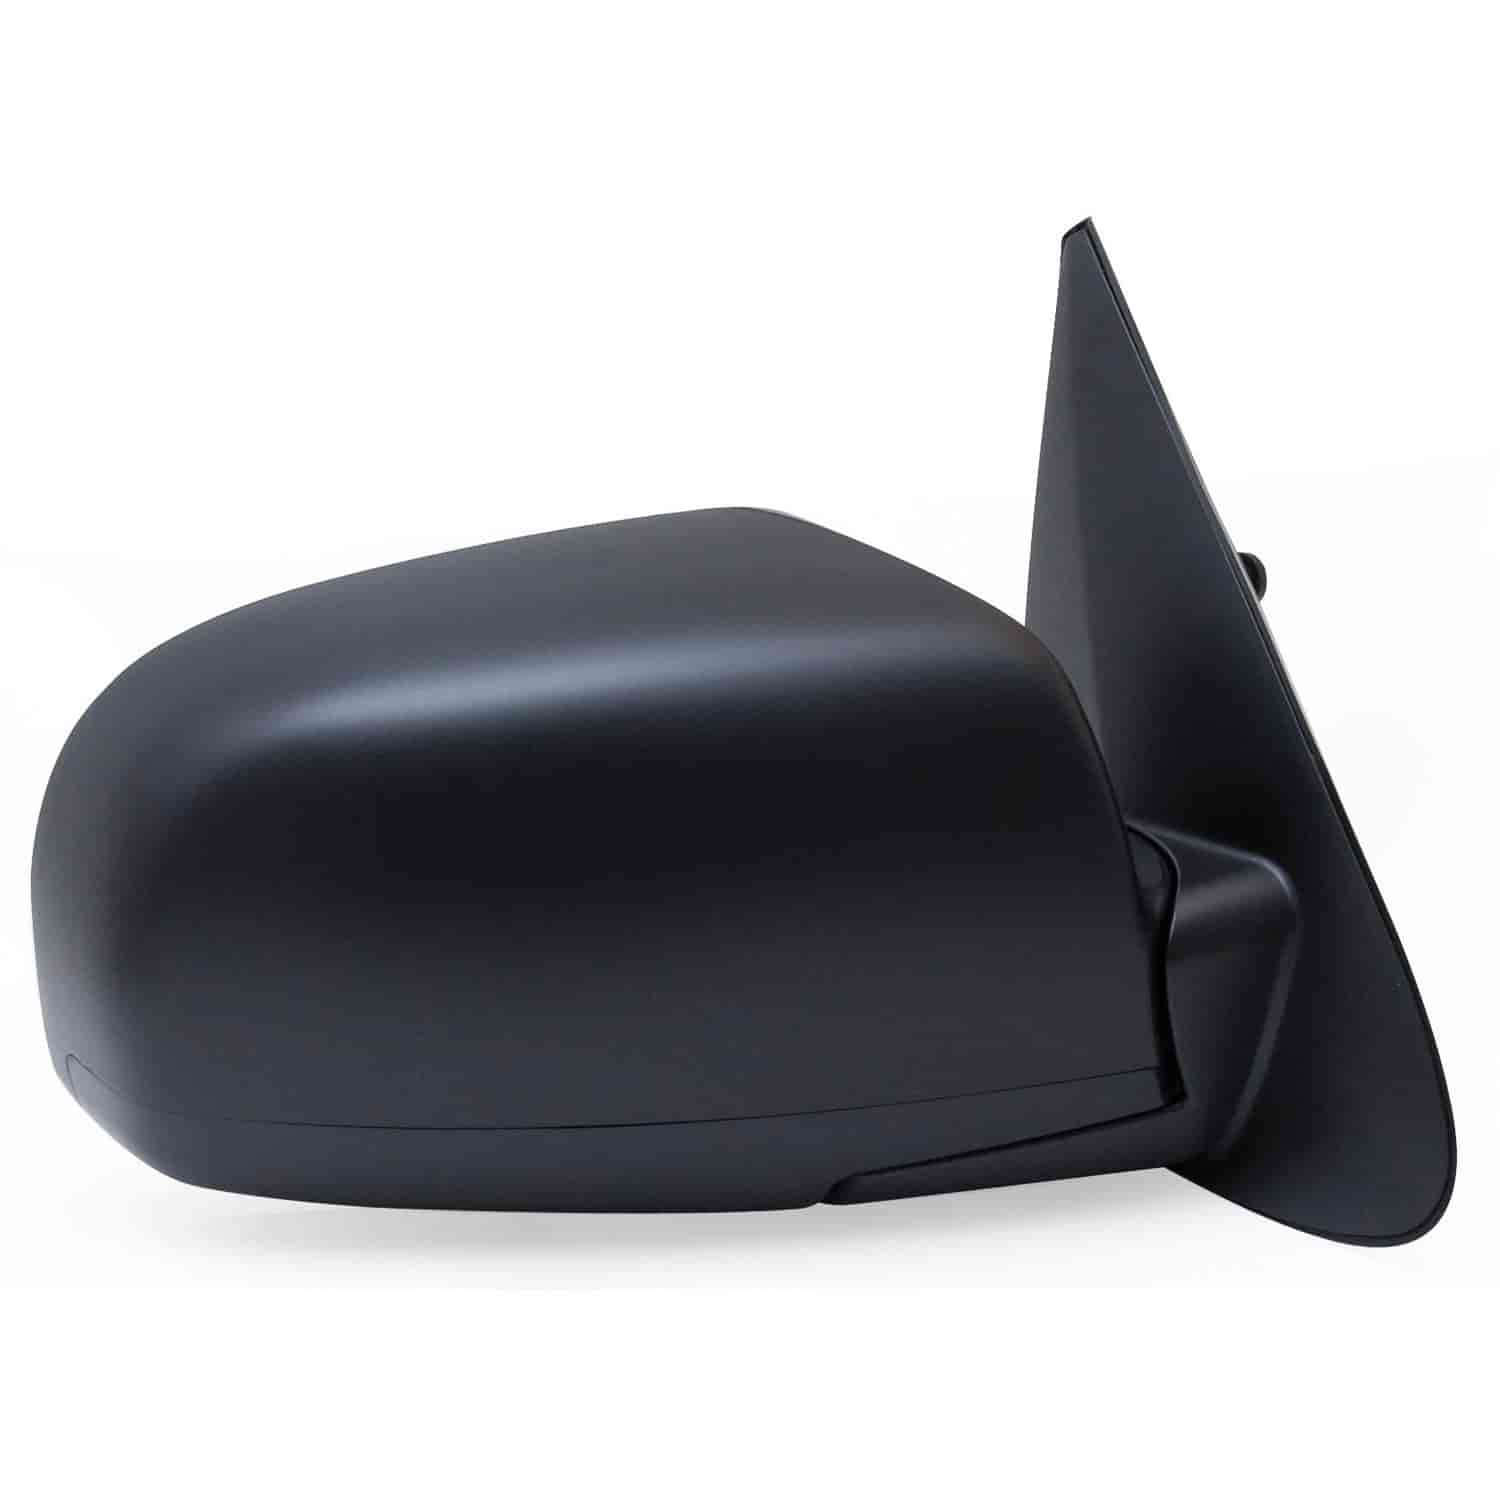 OEM Style Replacement mirror for 07-12 Hyundai Santa Fe passenger side mirror tested to fit and func